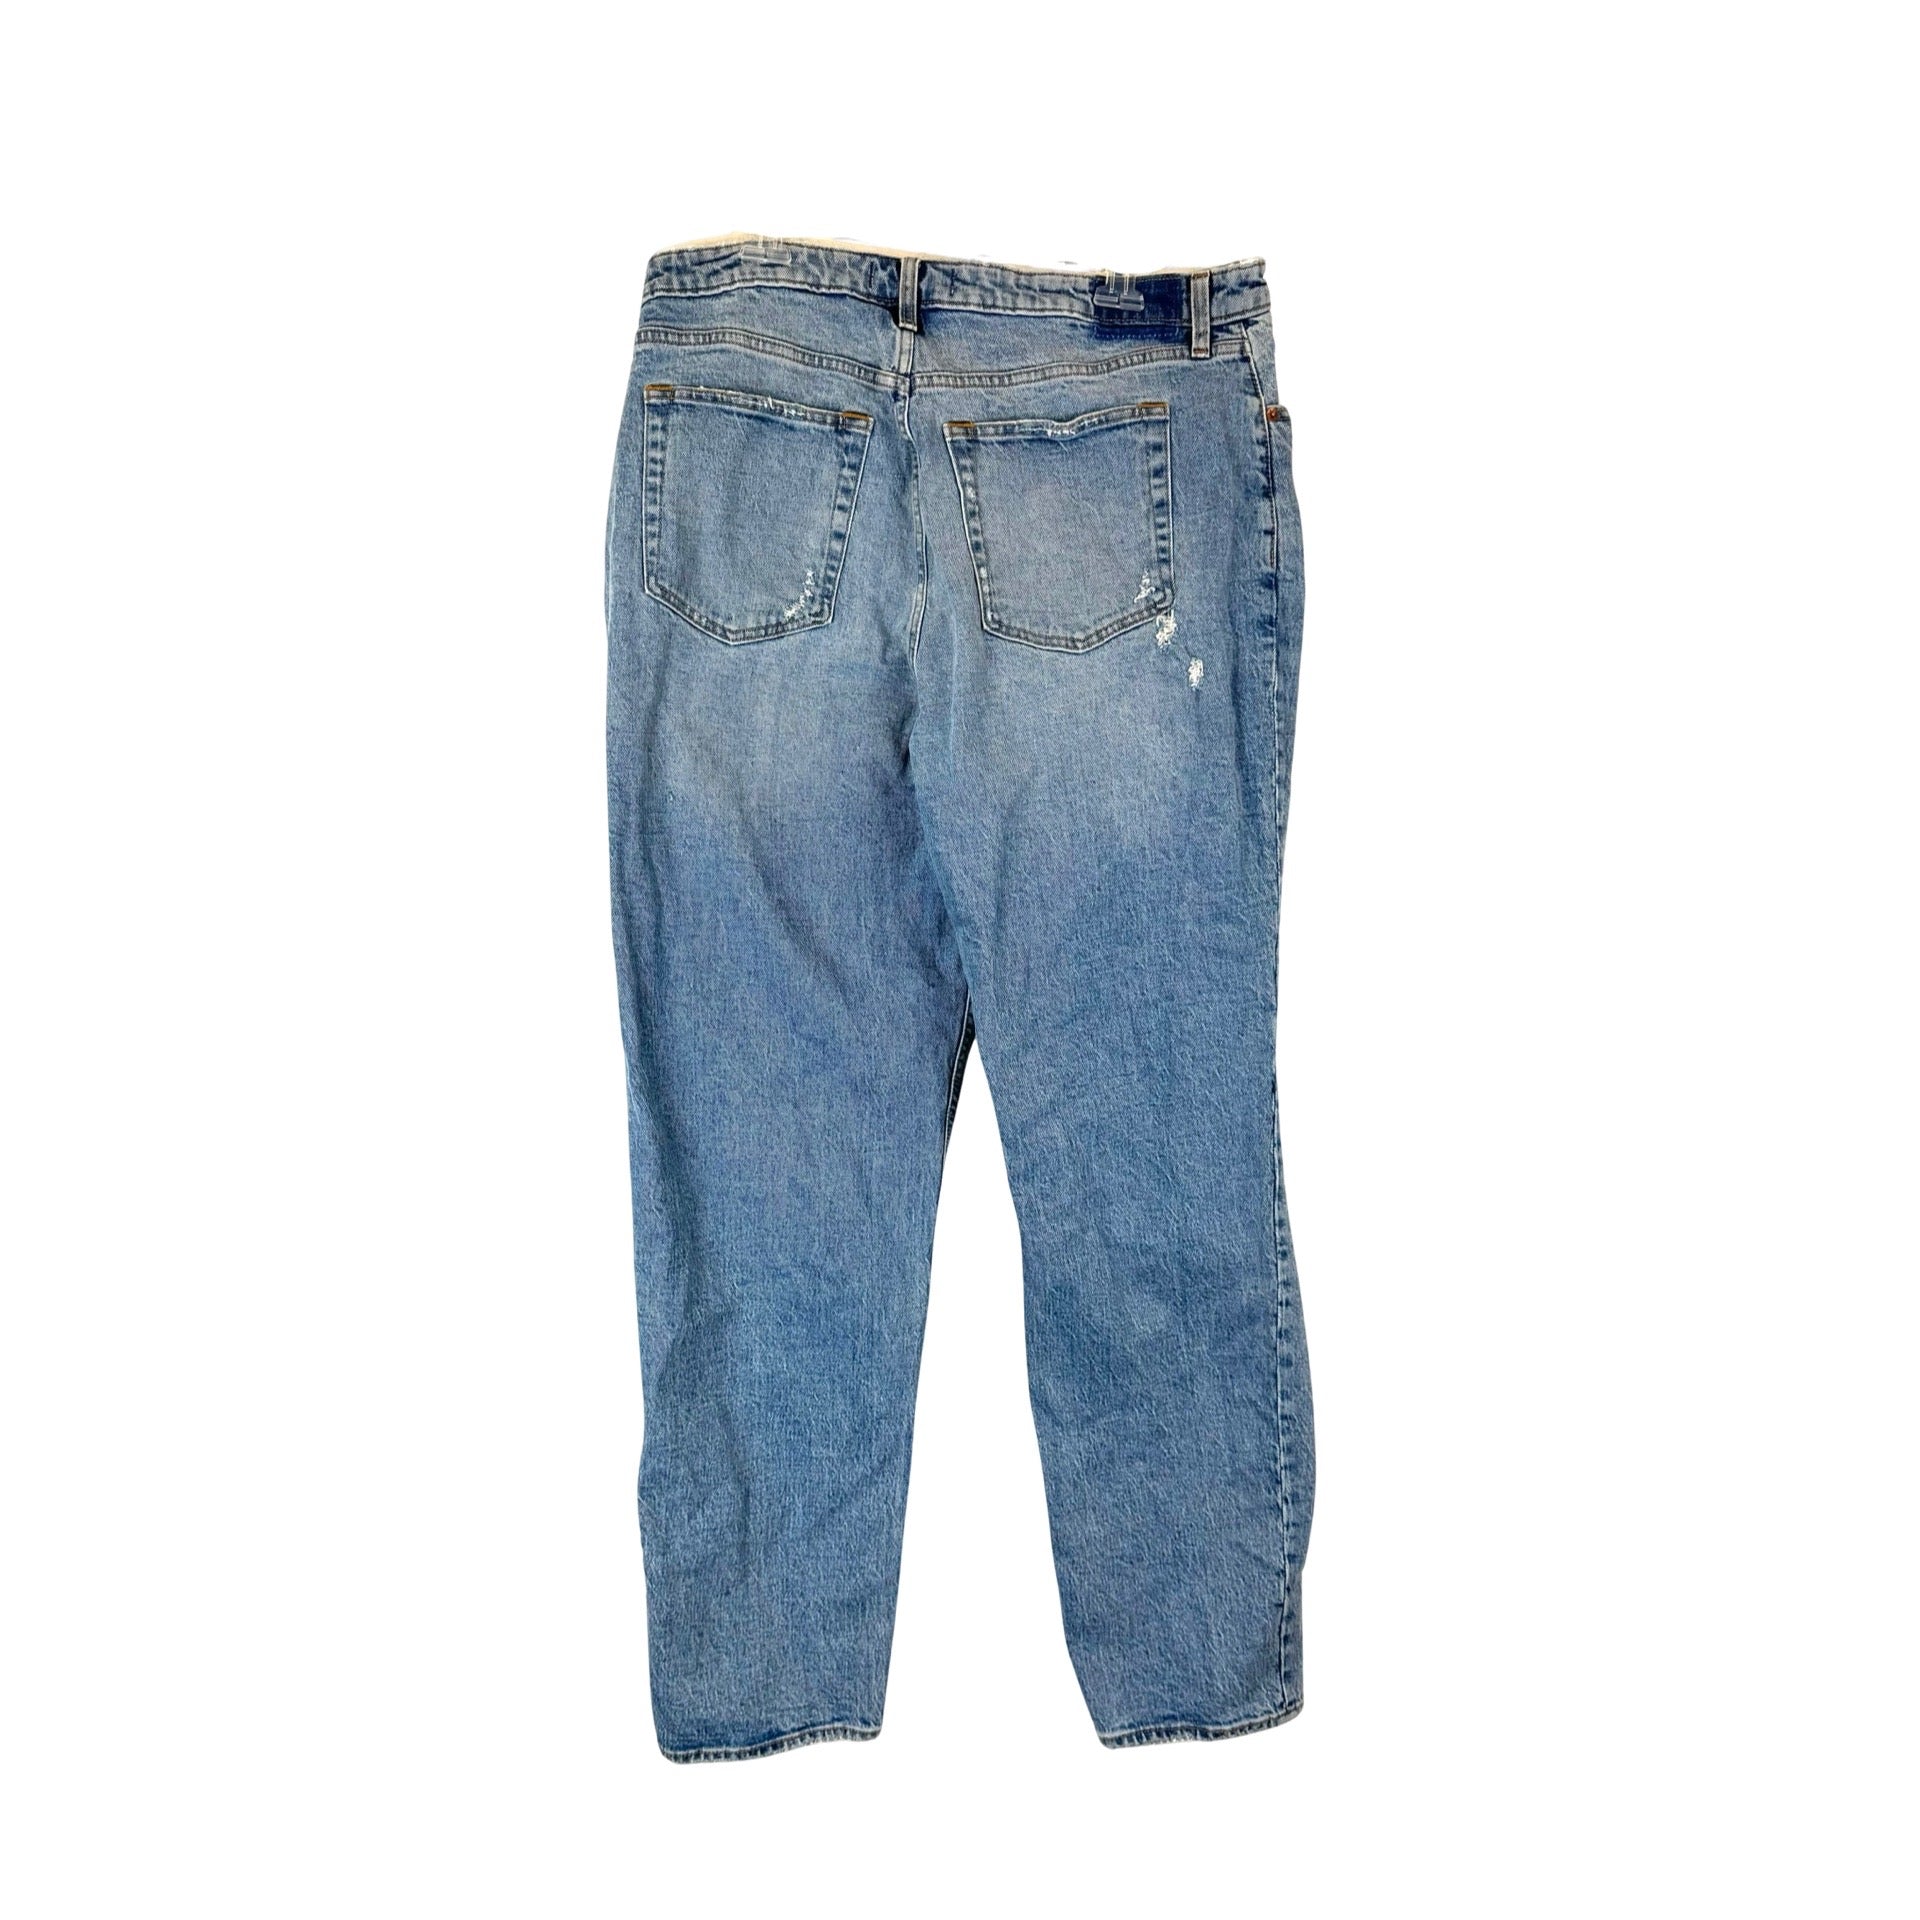 Abercrombie & Fitch The Dad High Rise Distressed Jeans